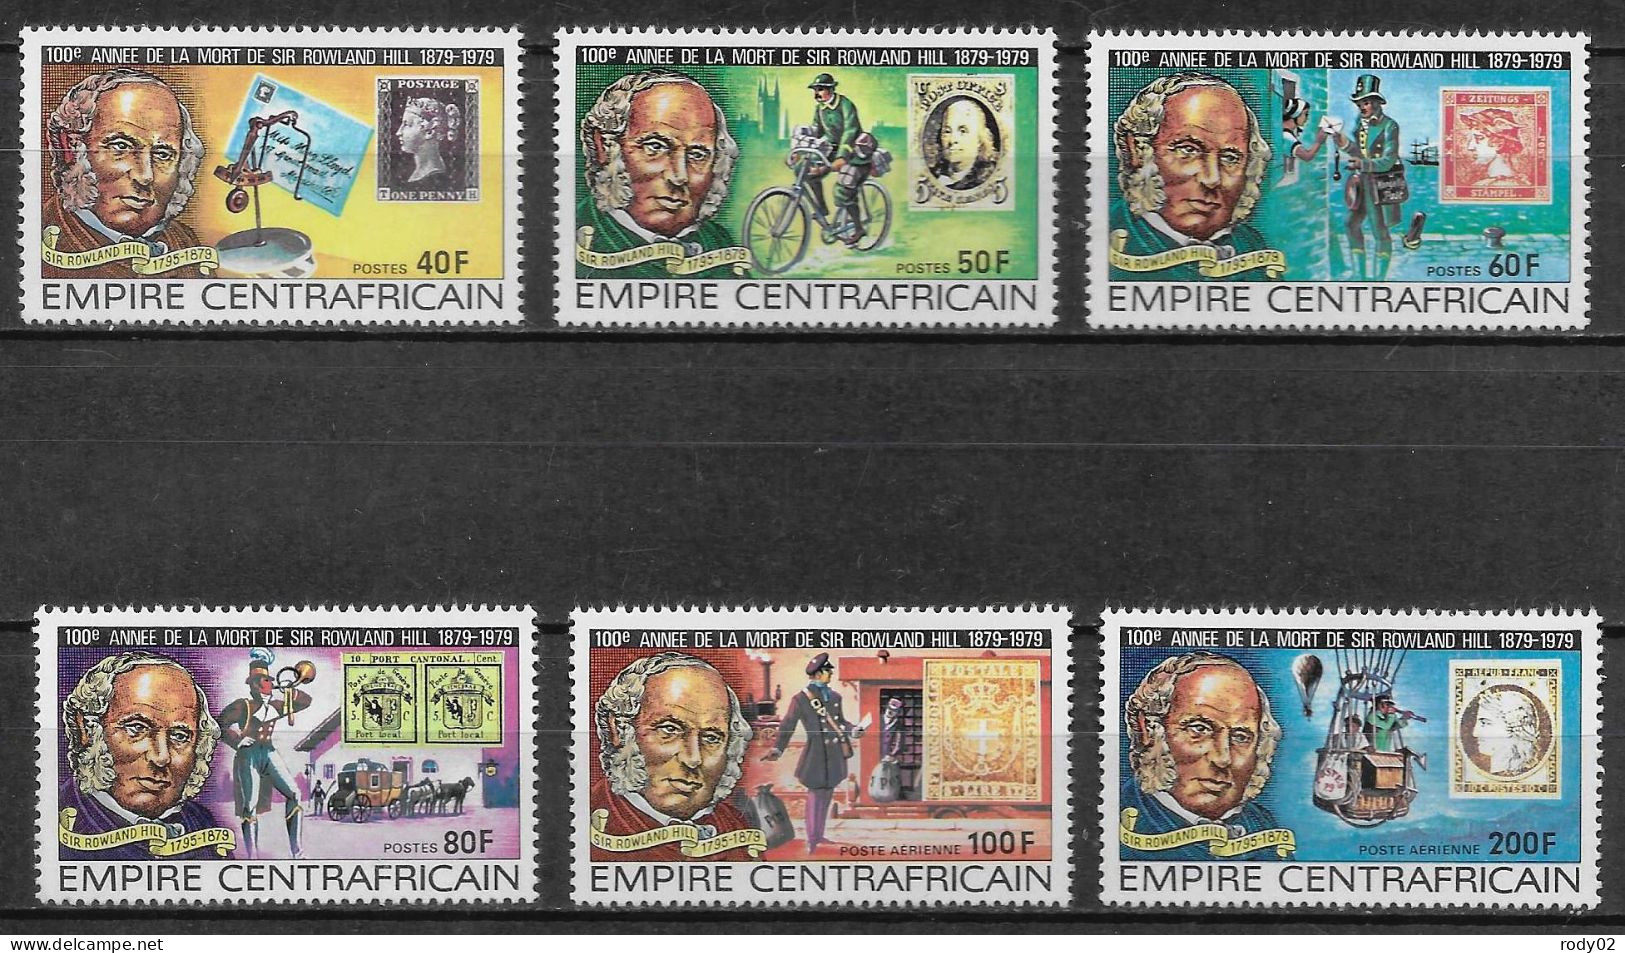 CENTRAFRIQUE - SIR ROWLAND HILL - N° 373 A 376, PA 197 A 198 ET BF 28 - NEUF** MNH - Rowland Hill